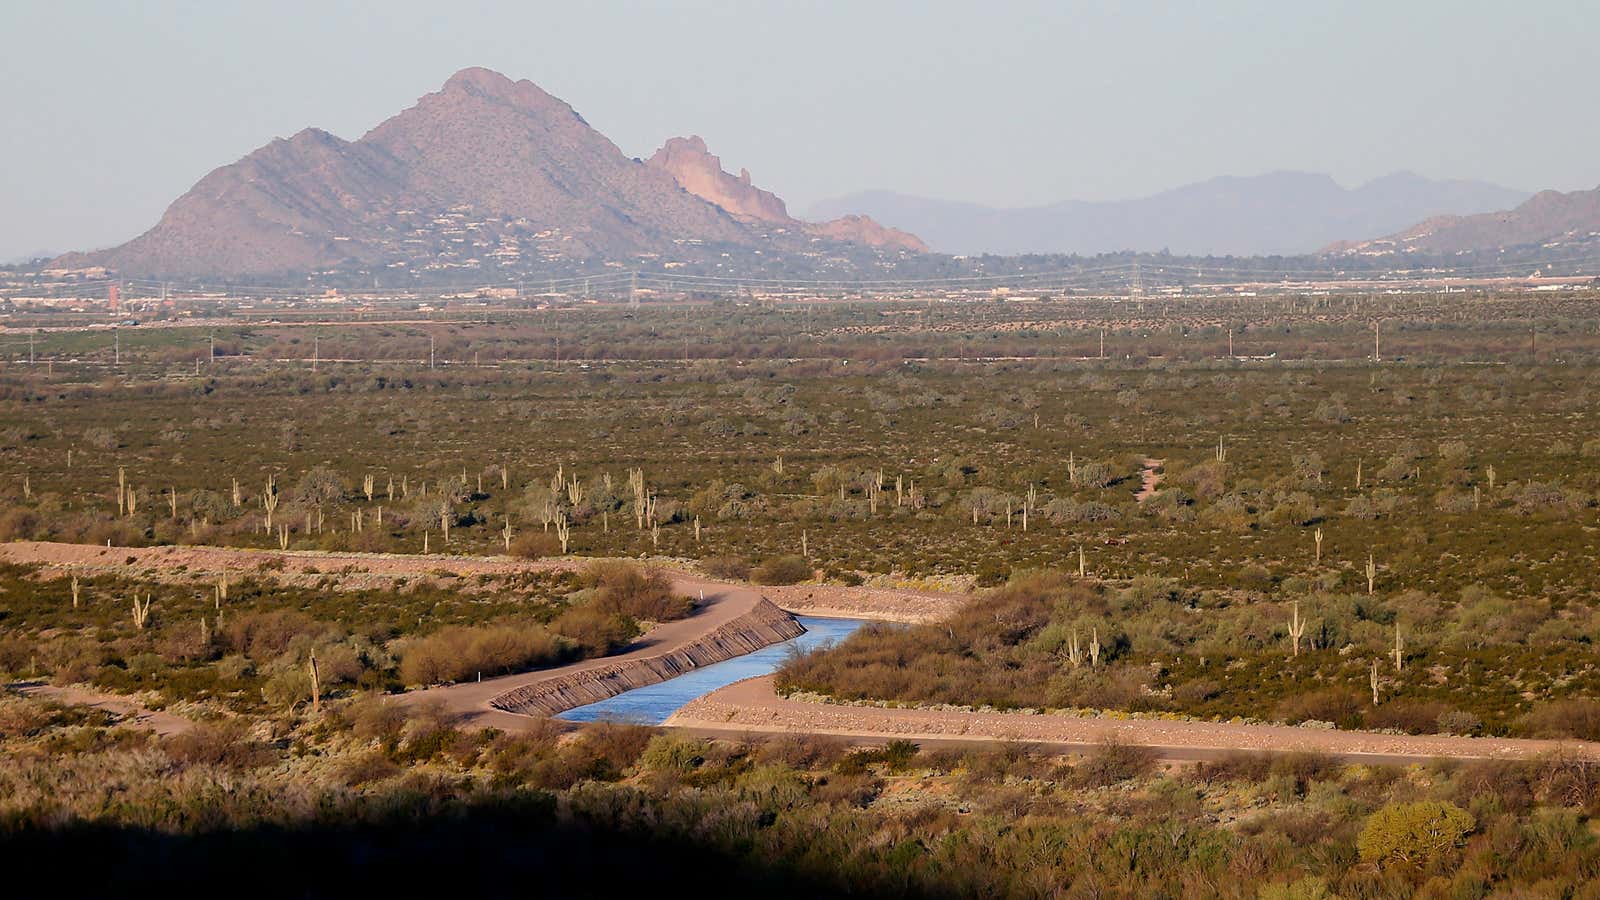 Arizona’s last straw supplying water to a parched state.